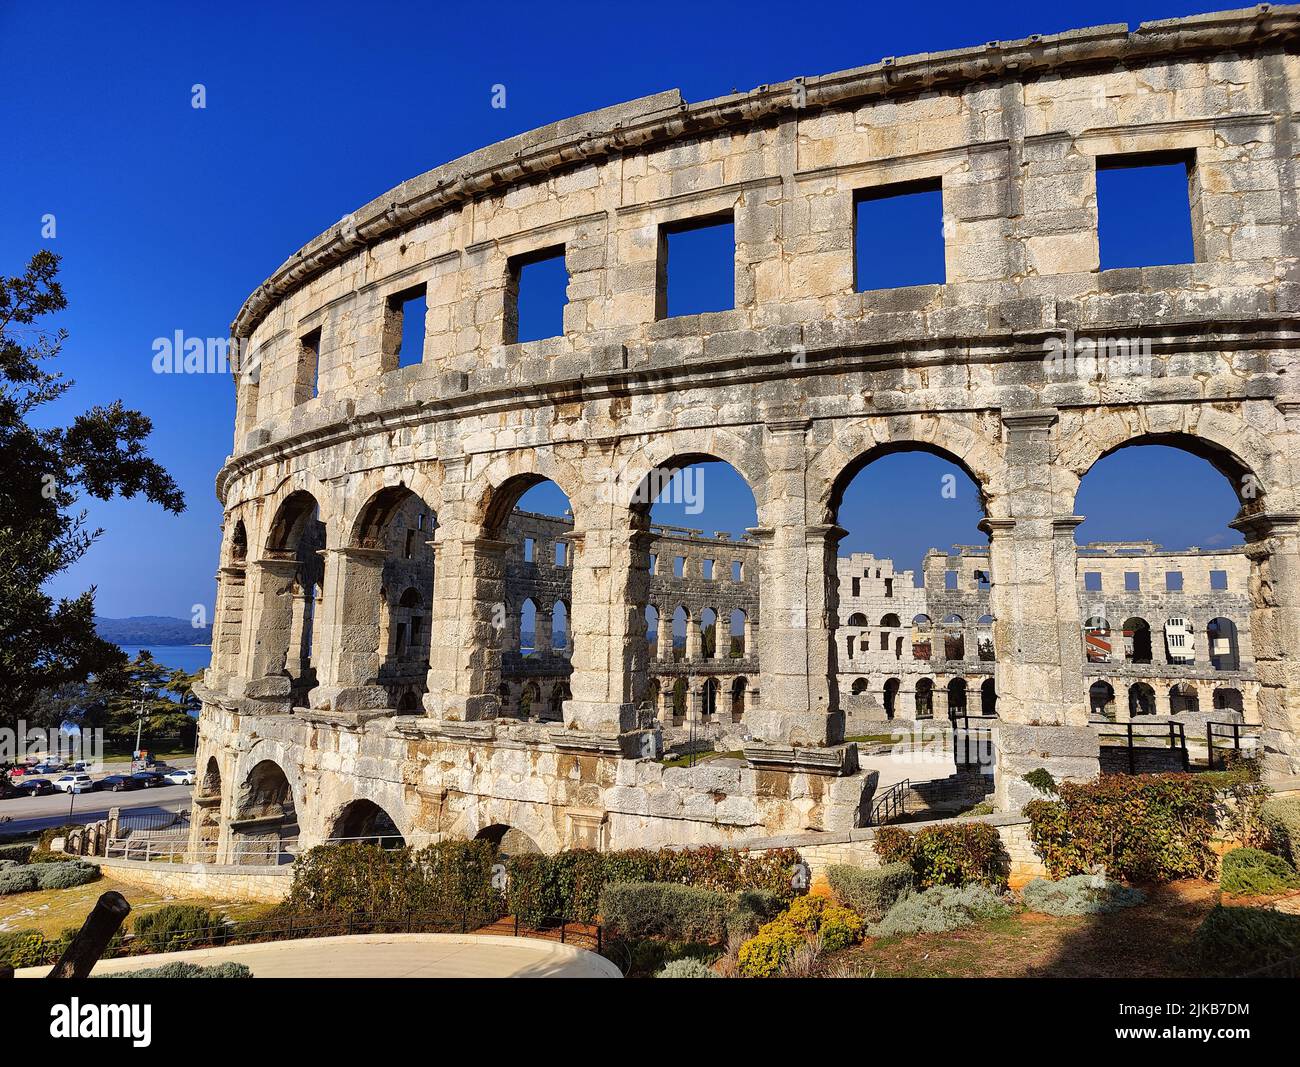 Croatia. Pula. Ruins of the best preserved Roman amphitheatre built in the first century AD during the reign of the Emperor Vespasian. Stock Photo